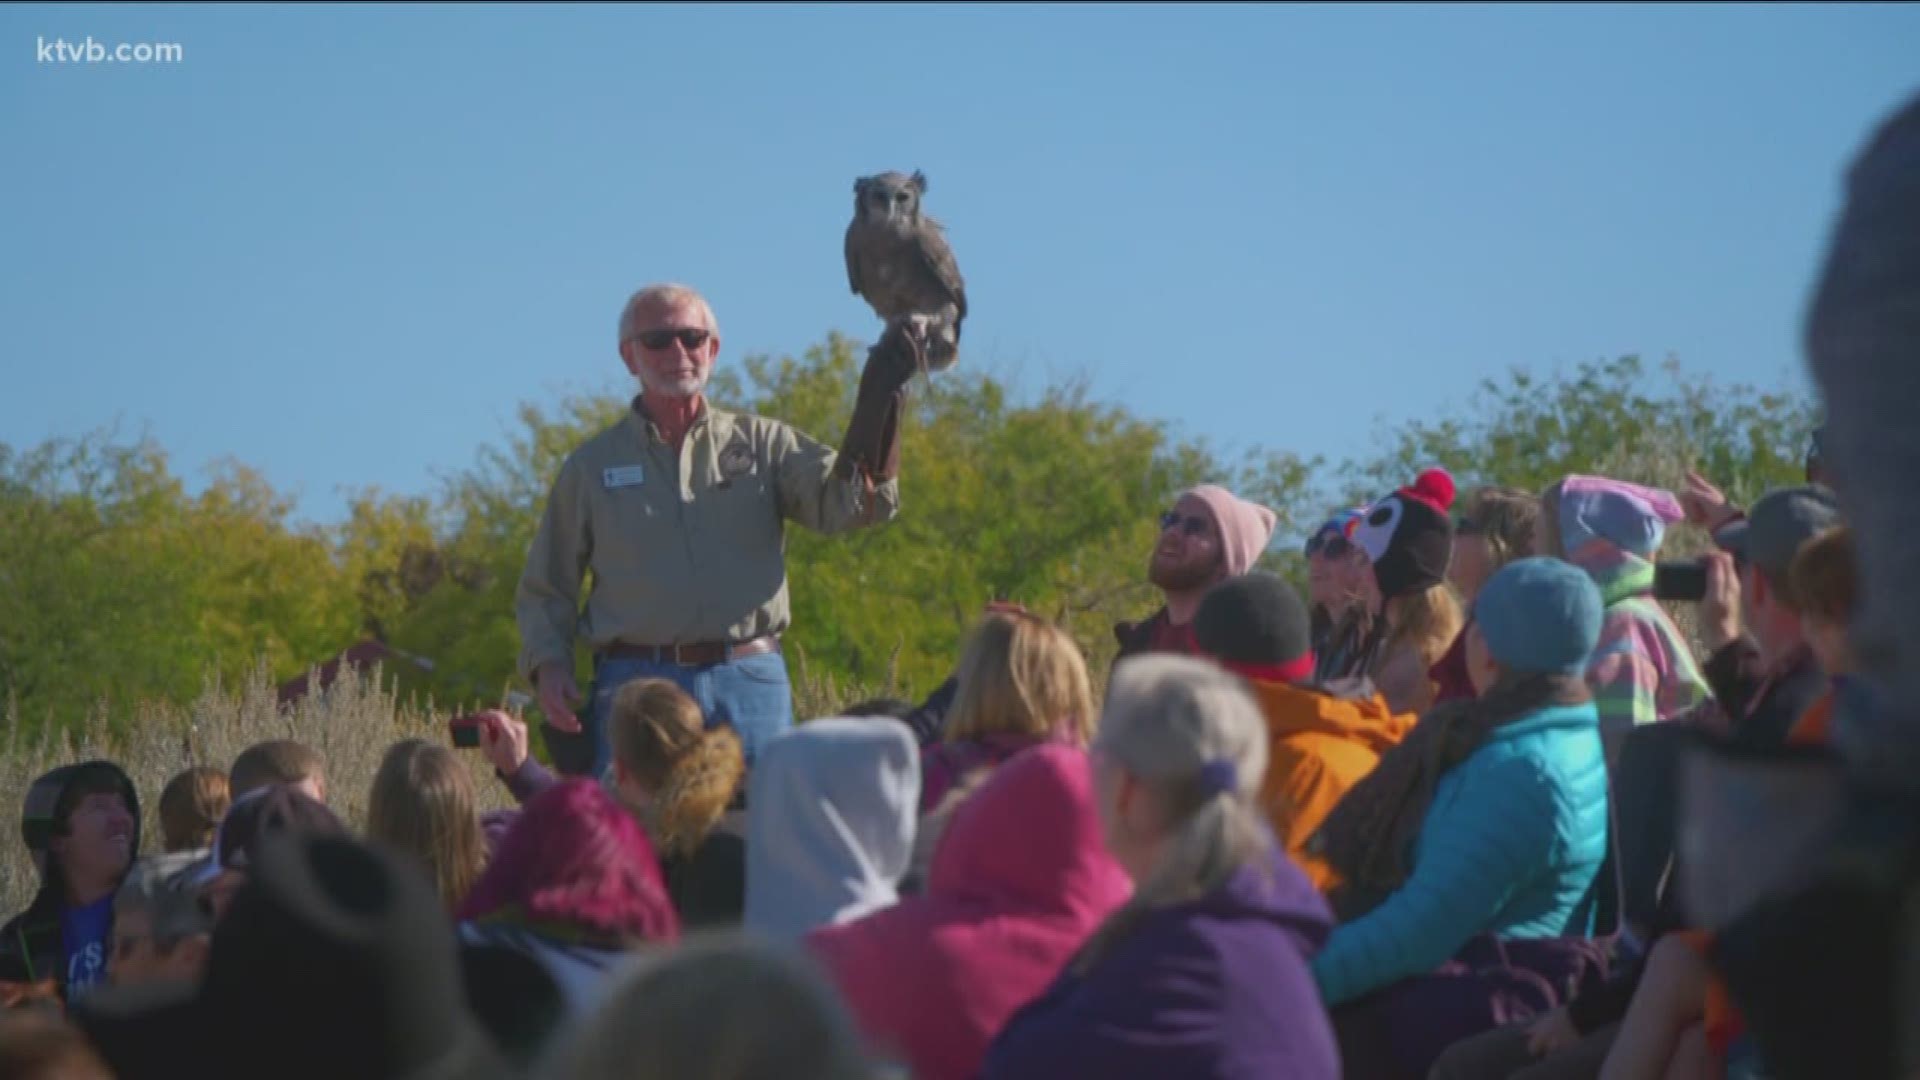 The Fall Flights demonstration south of Boise is your best opportunity to get up-close to a hawk, falcon or owl as they soar inches from your head.